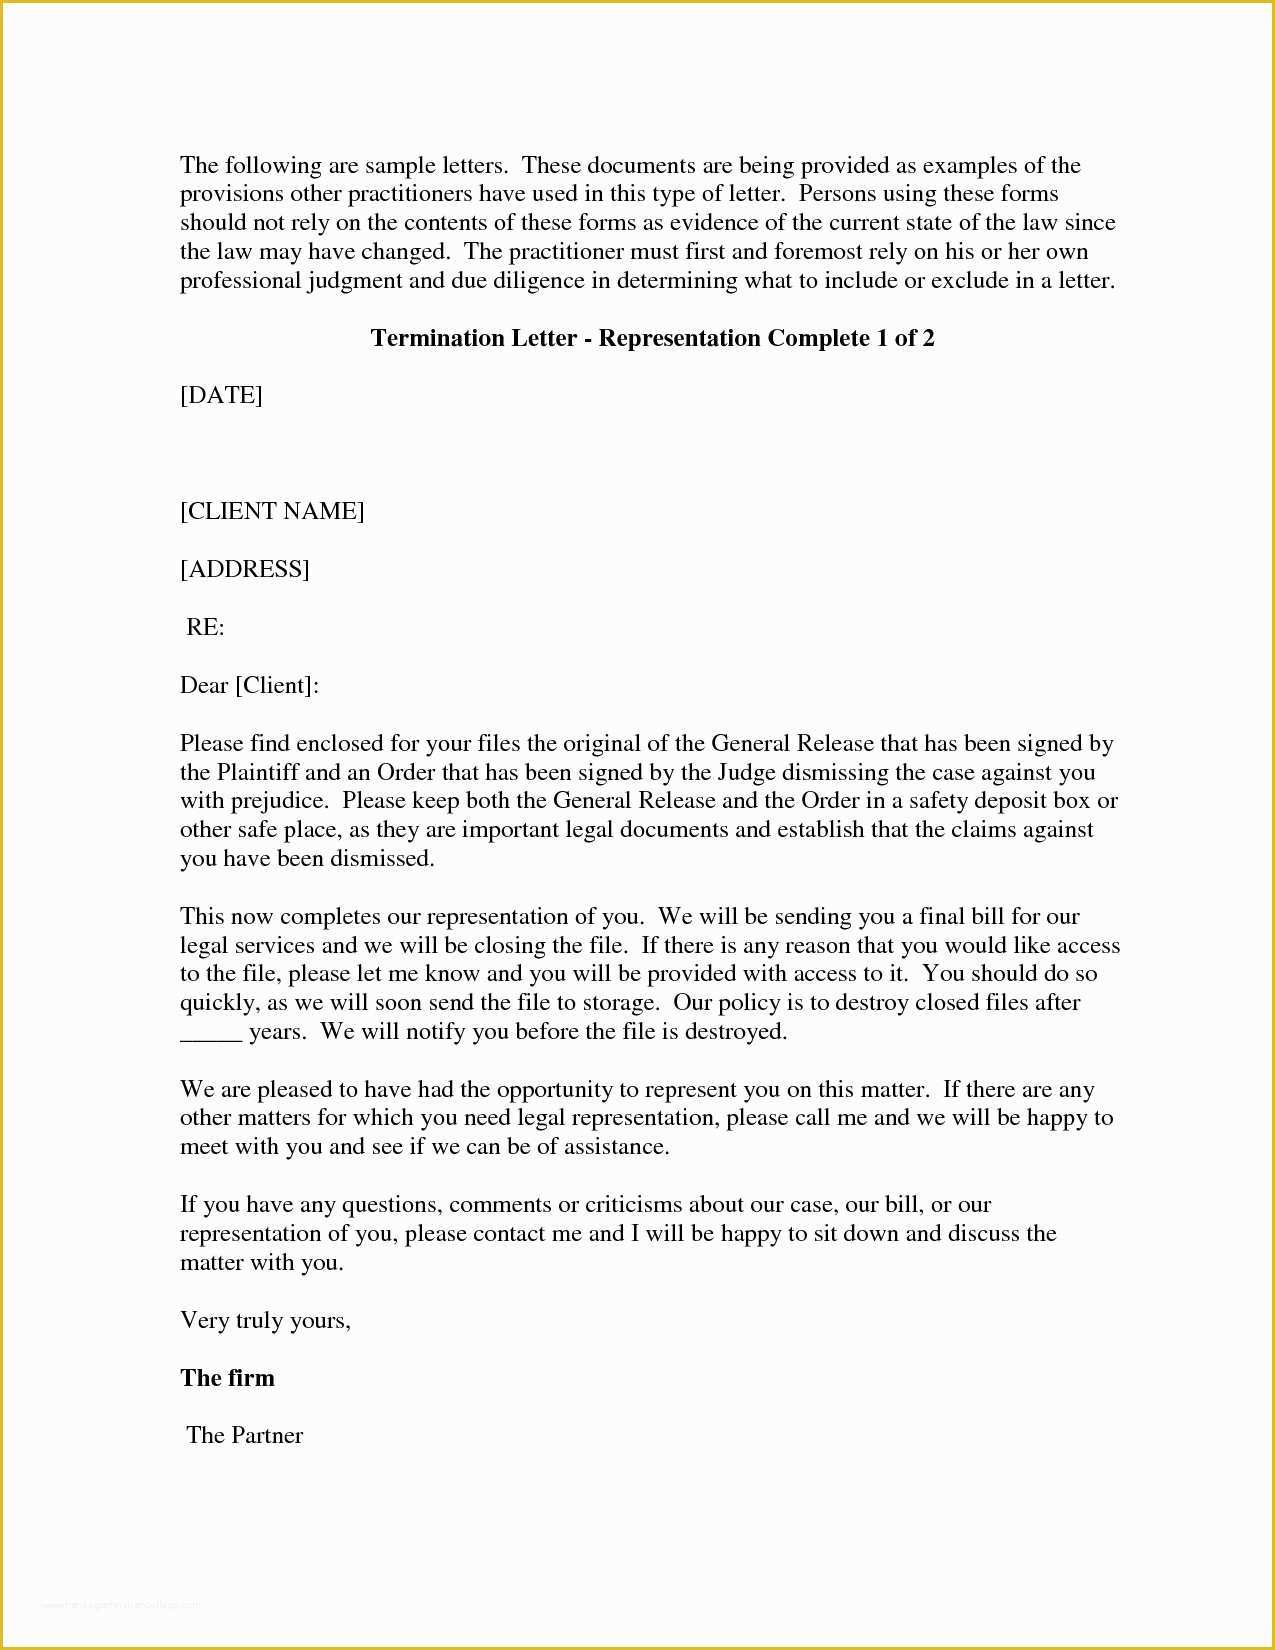 Termination Letter Template Free Of Sample attorney withdrawal Letter to Client